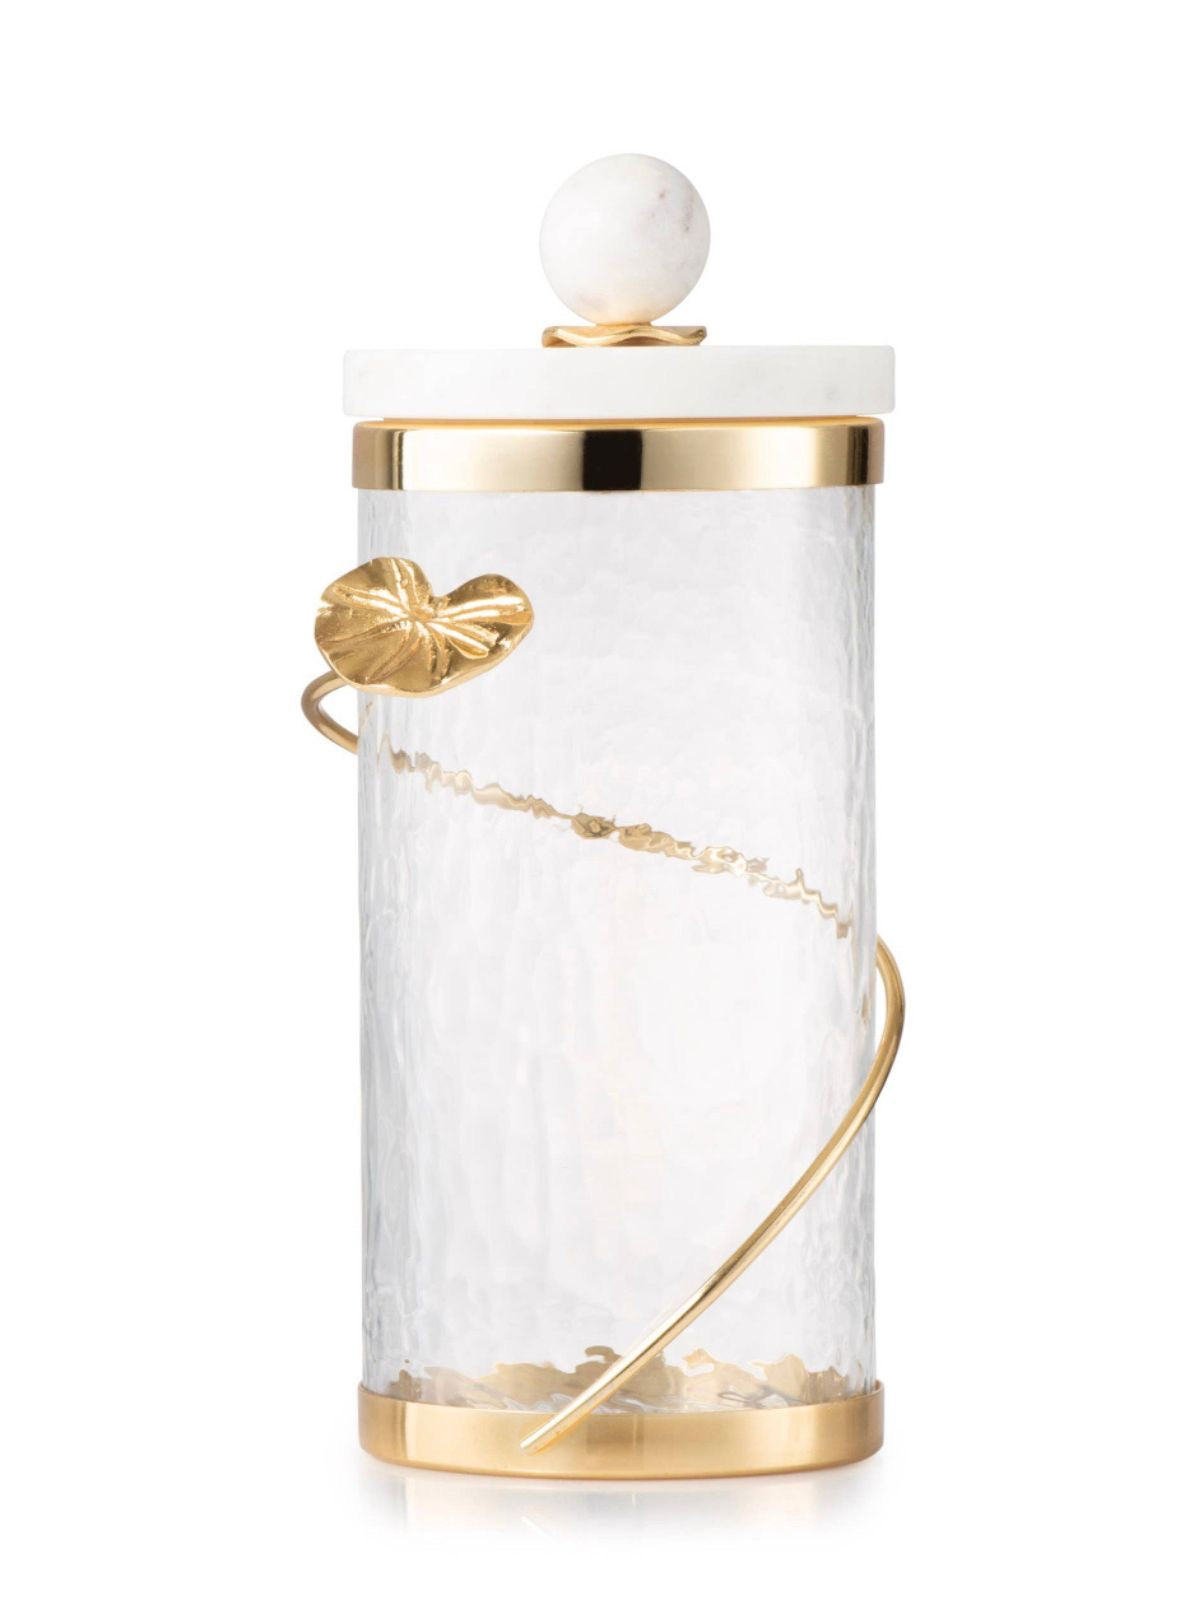 The Cuore D’ Oro Glass Canister Has A Gold Leaf Design & Marble Lid Large Size From KYA Home Decor